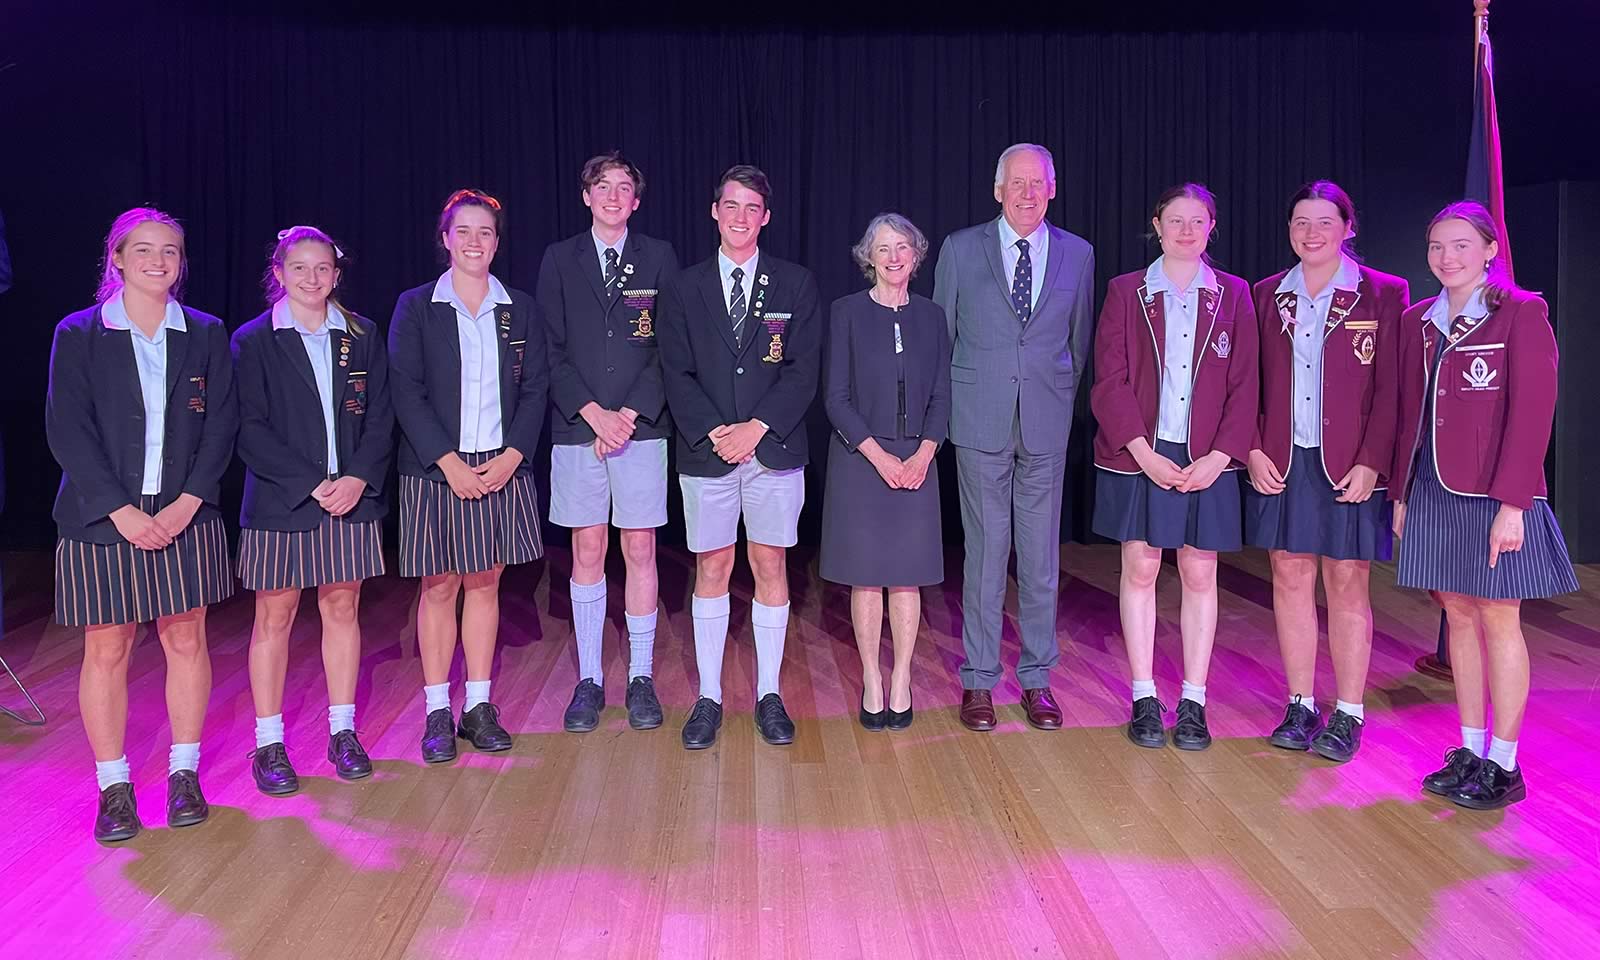 School Captains from Hutchins, St Michael’s Collegiate School and Fahan School at the Year 12 International Women’s Day Dinner with Her Excellency Professor the Honourable Kate Warner AC and husband, Mr Richard Warner.